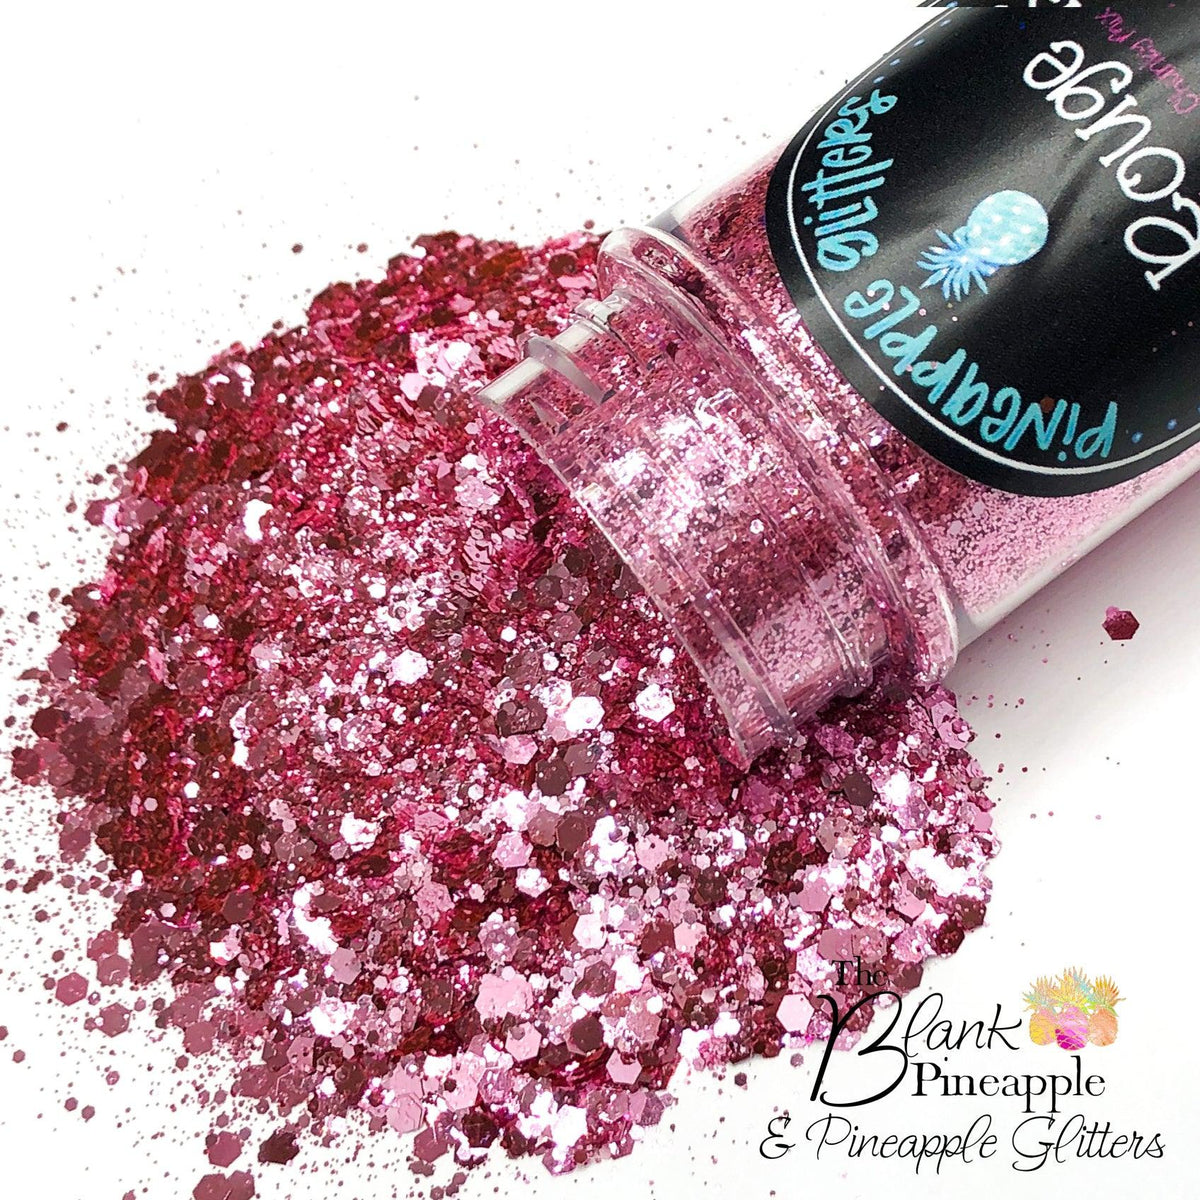 Chunky Mix Glitter. Solvent-resistant, High-quality, Polyester glitter. –  The Blank Pineapple